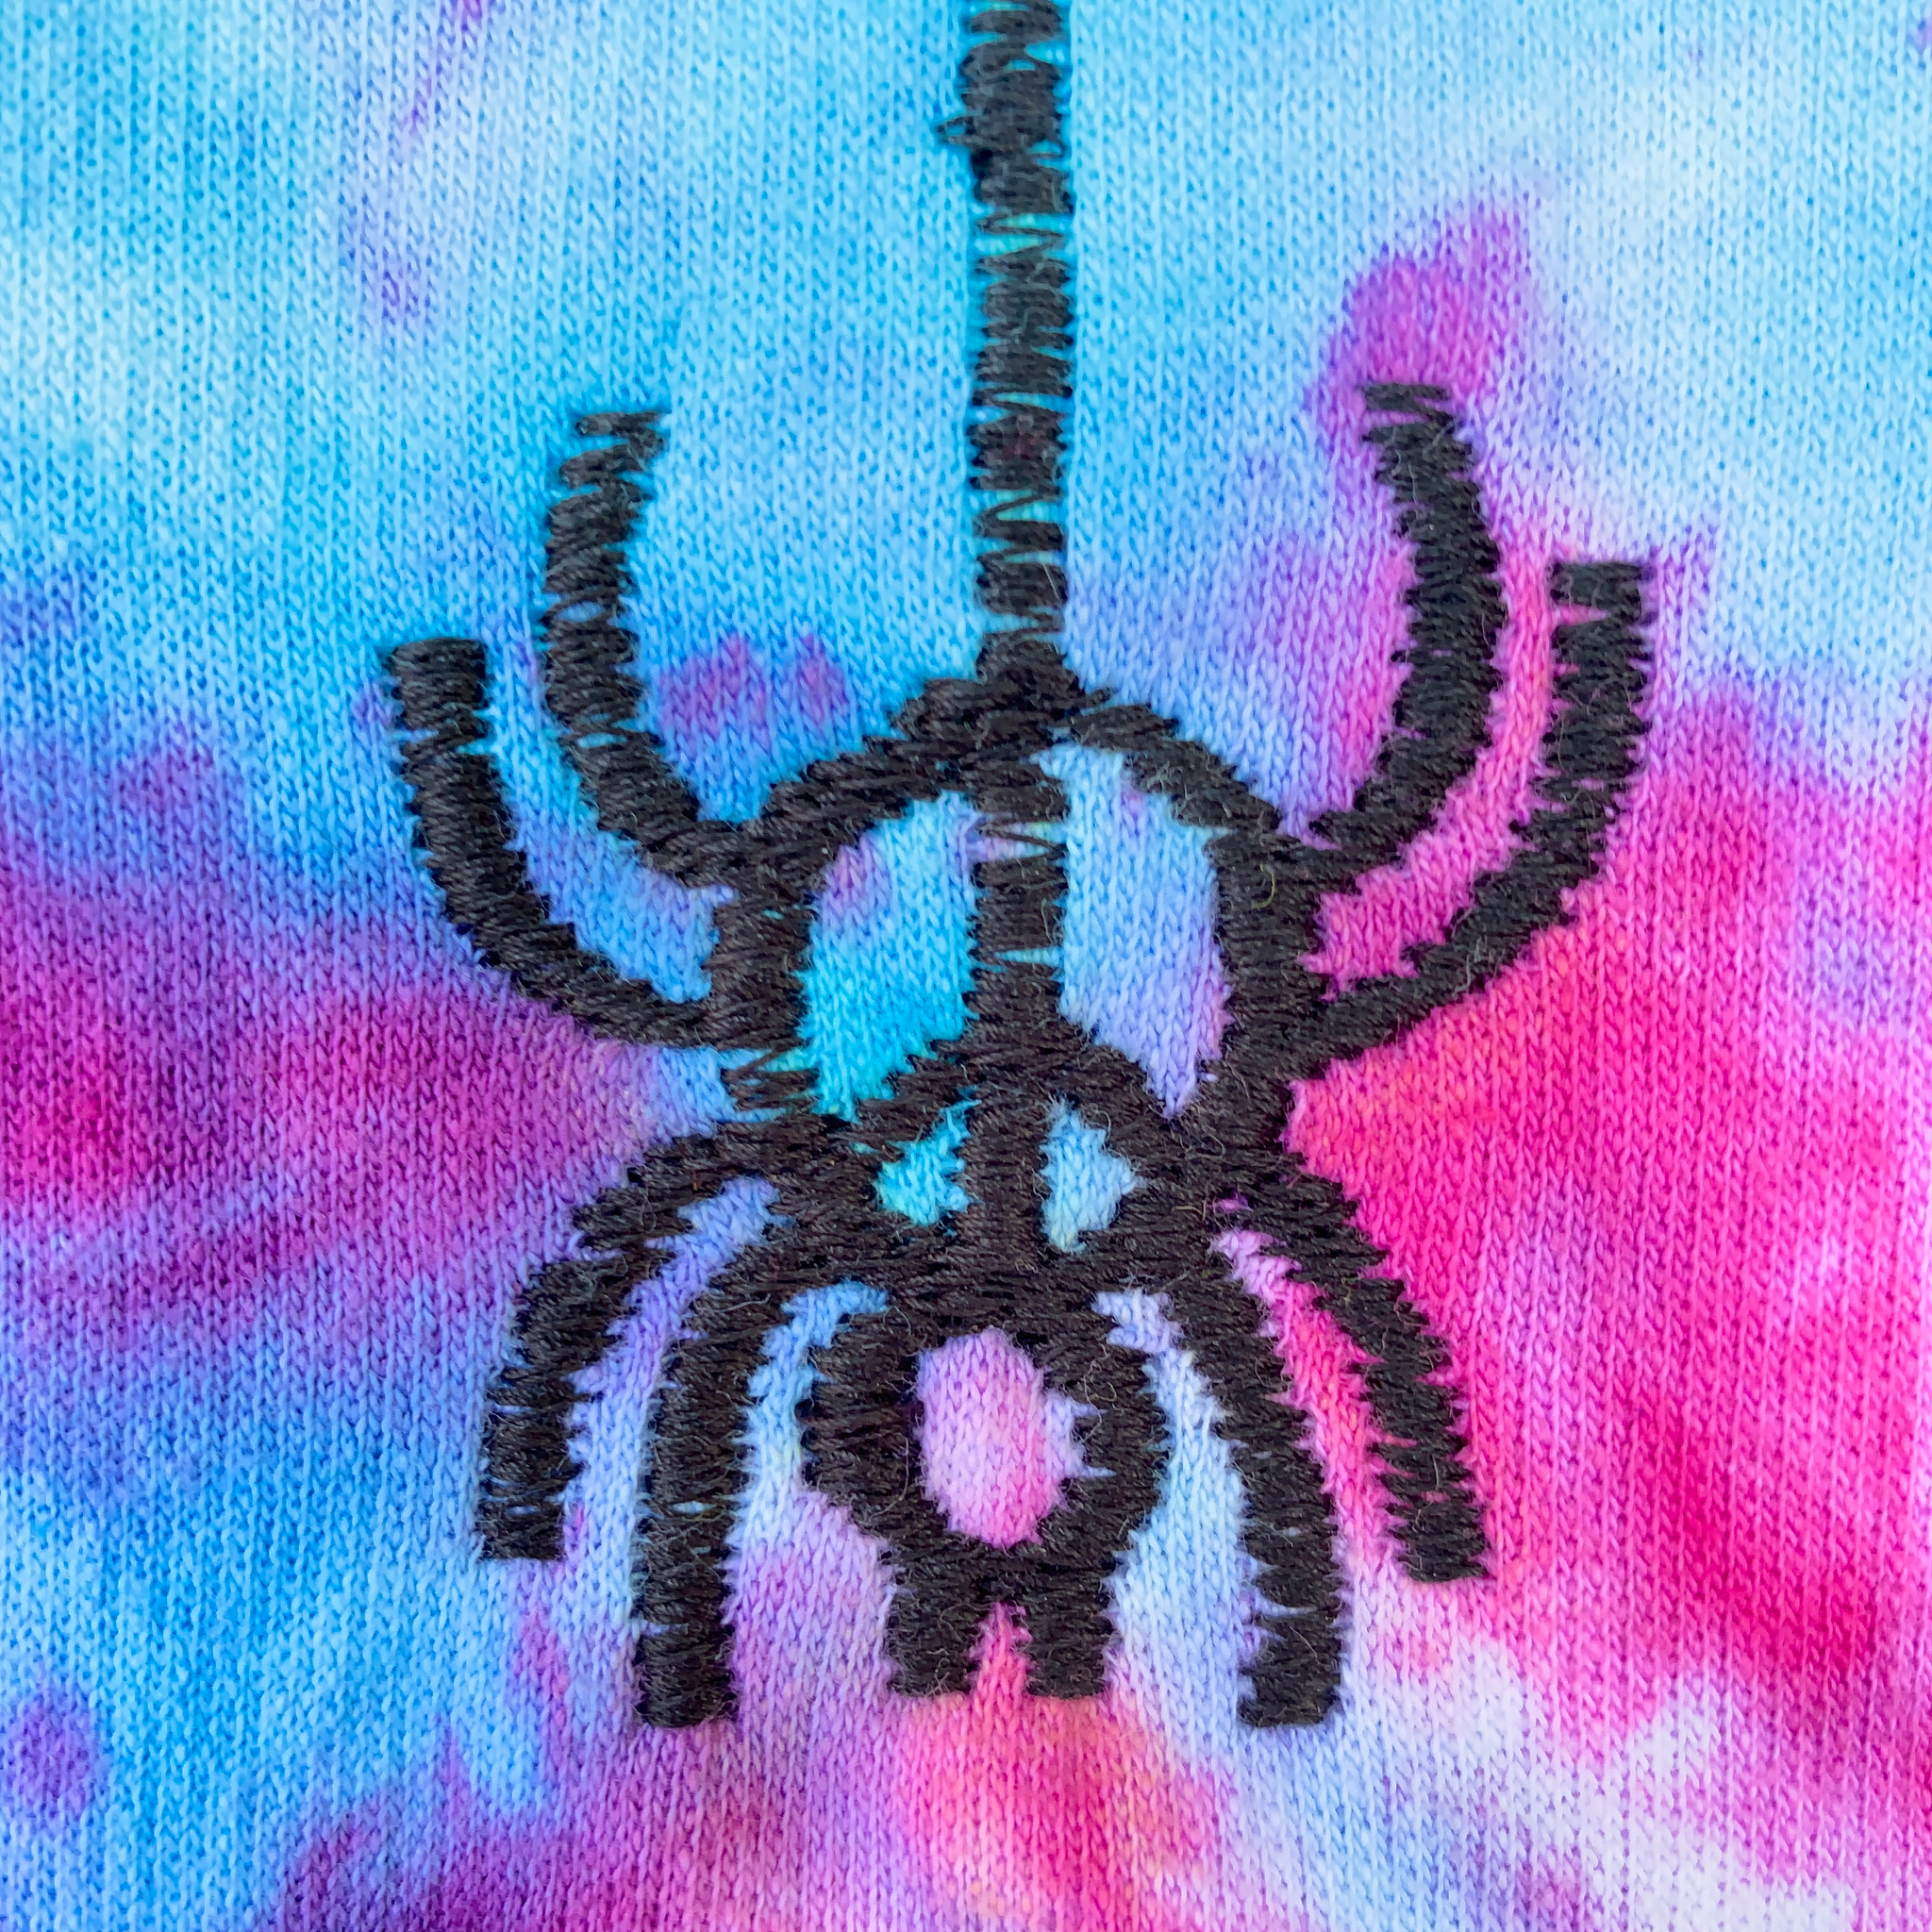 Embroidered and Dyed Lightweight Hoodie - M